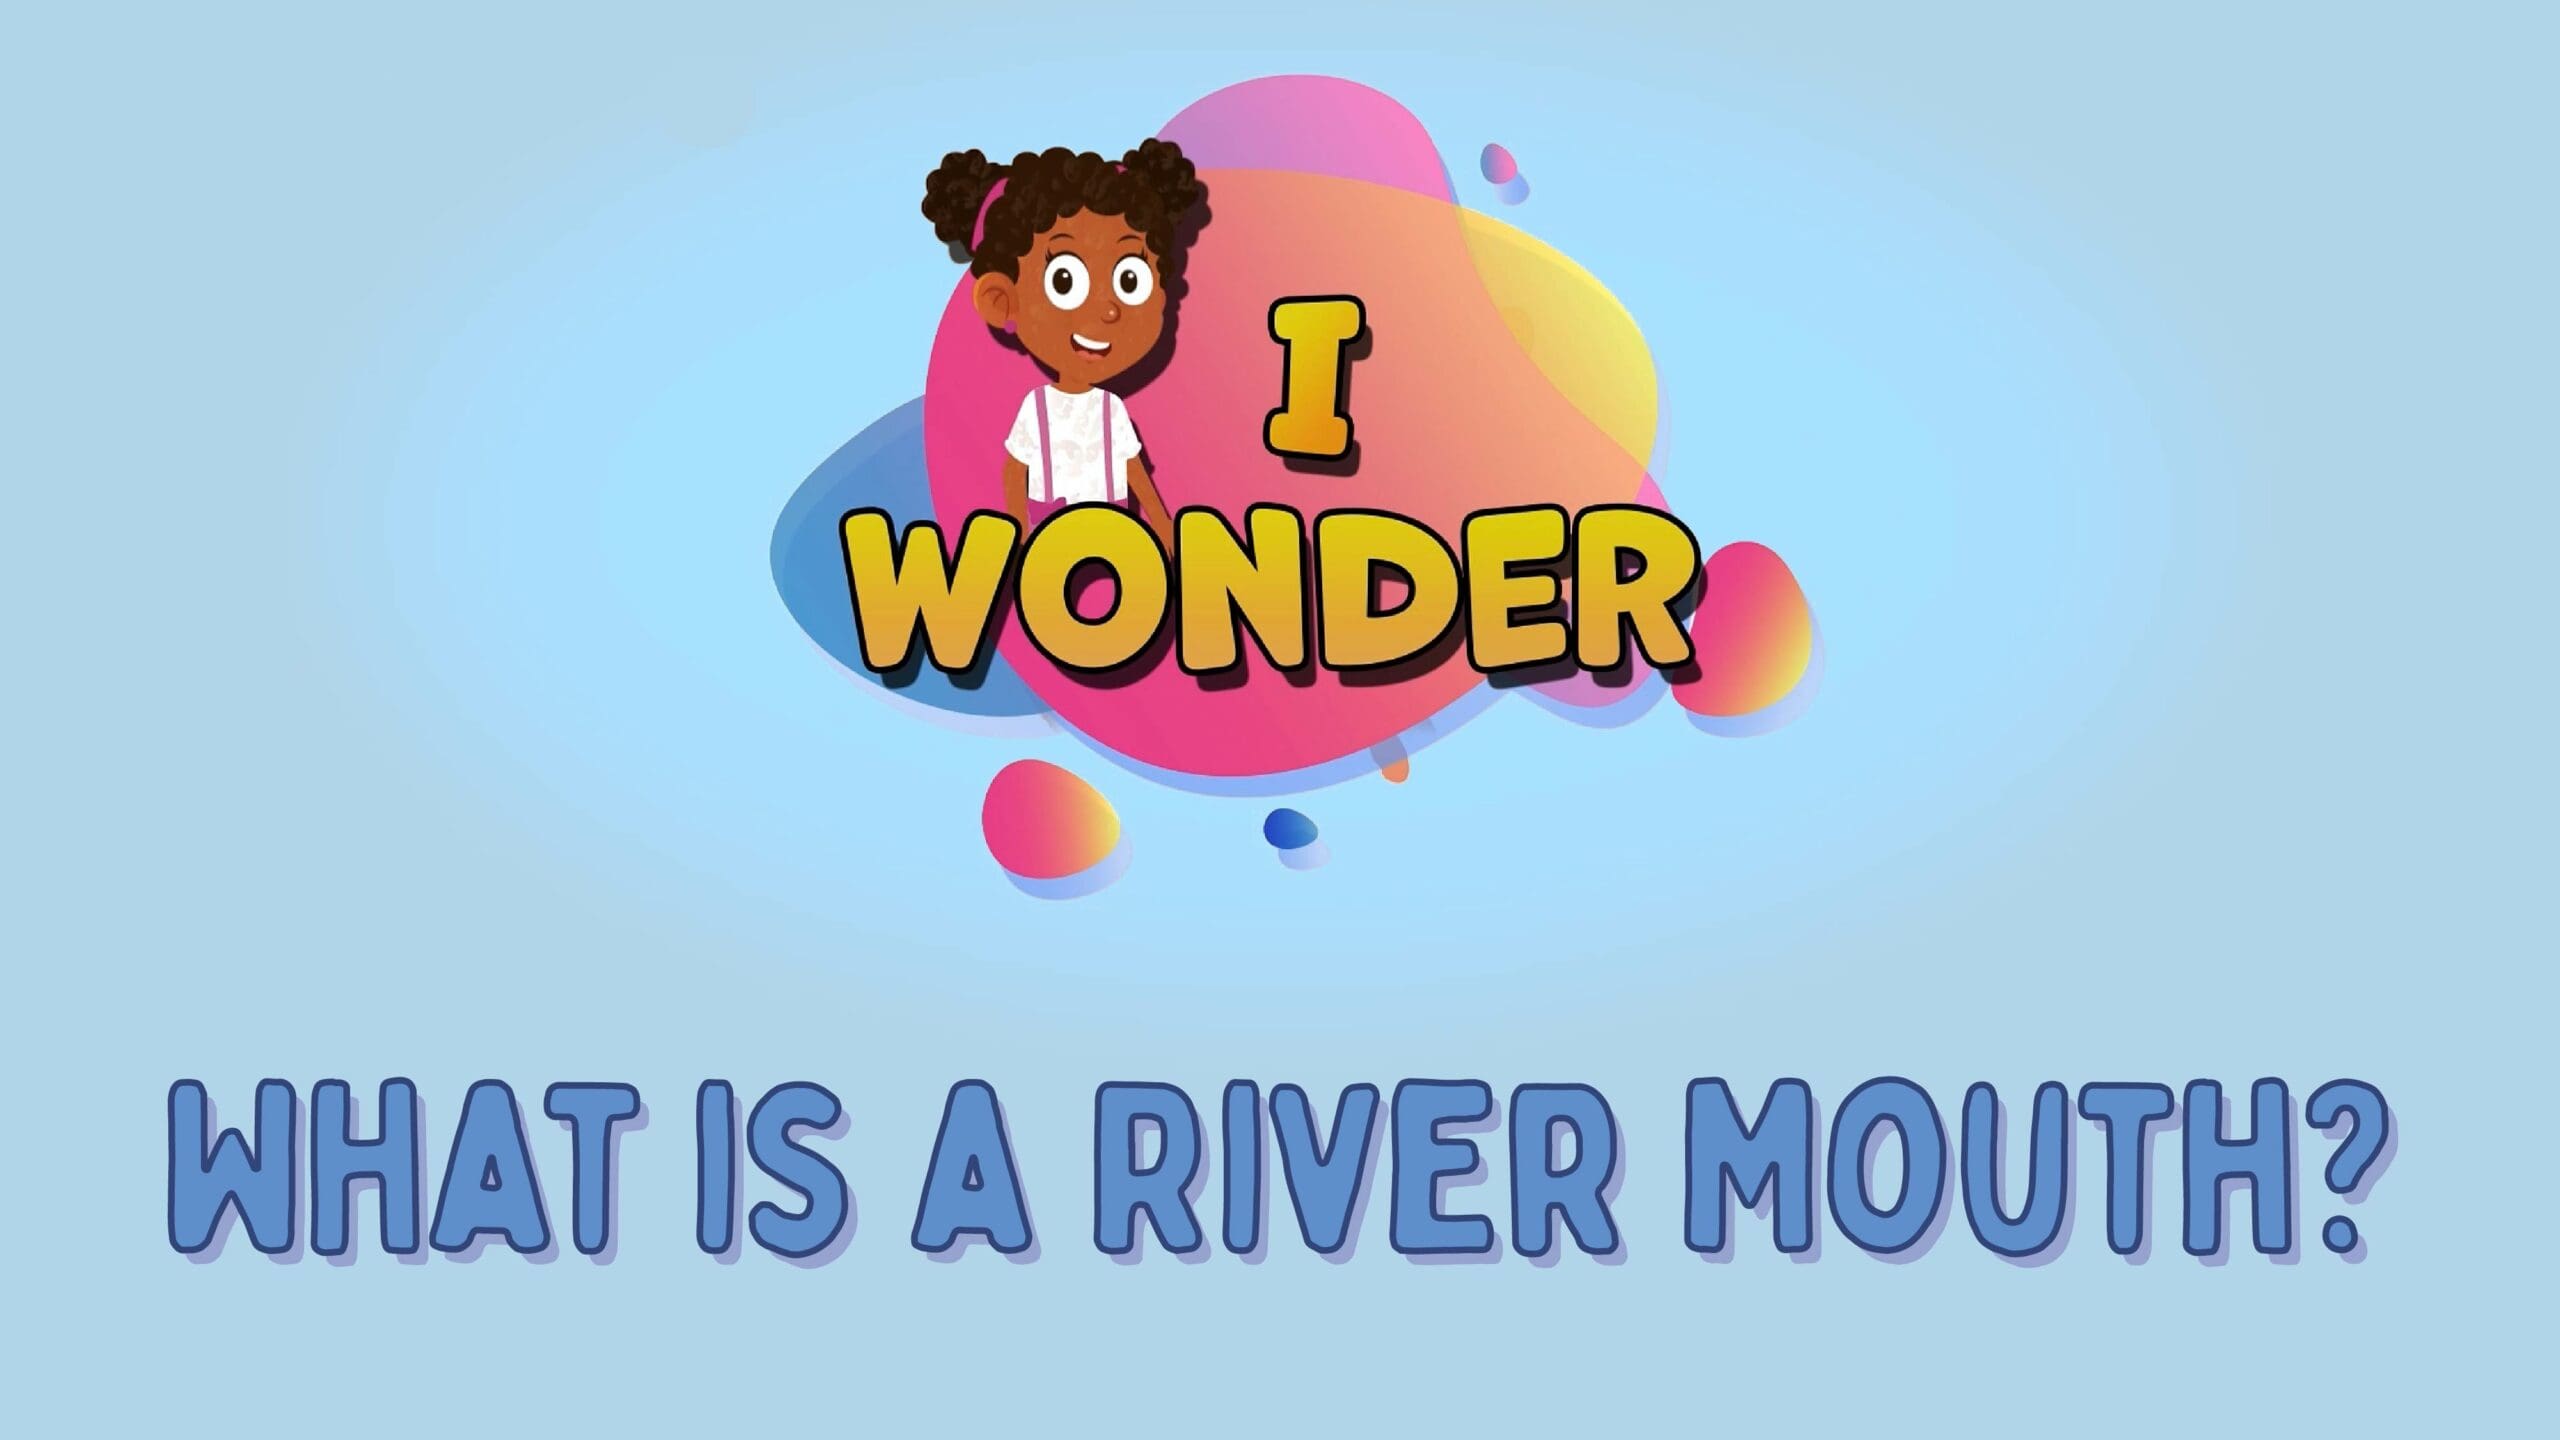 What Is A River Mouth?